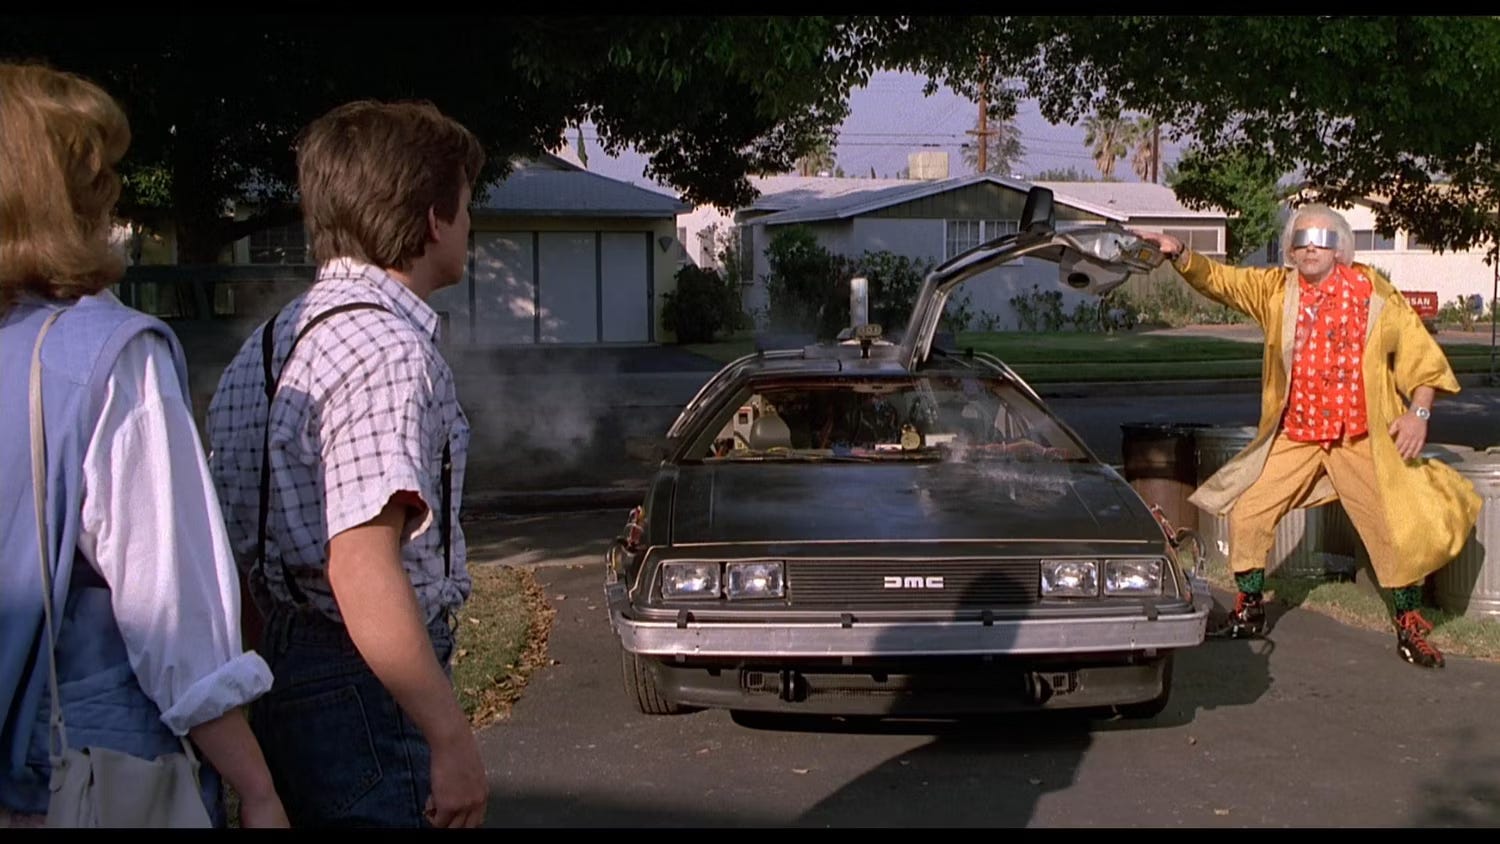 Screenshot from Back to the Future. Doc is standing to screen right, wearing a yellow suit and silver glasses, with his right hand resting on the open door of the Delorean. Marty and Jennifer are shown from the back on screen left, looking at Doc.